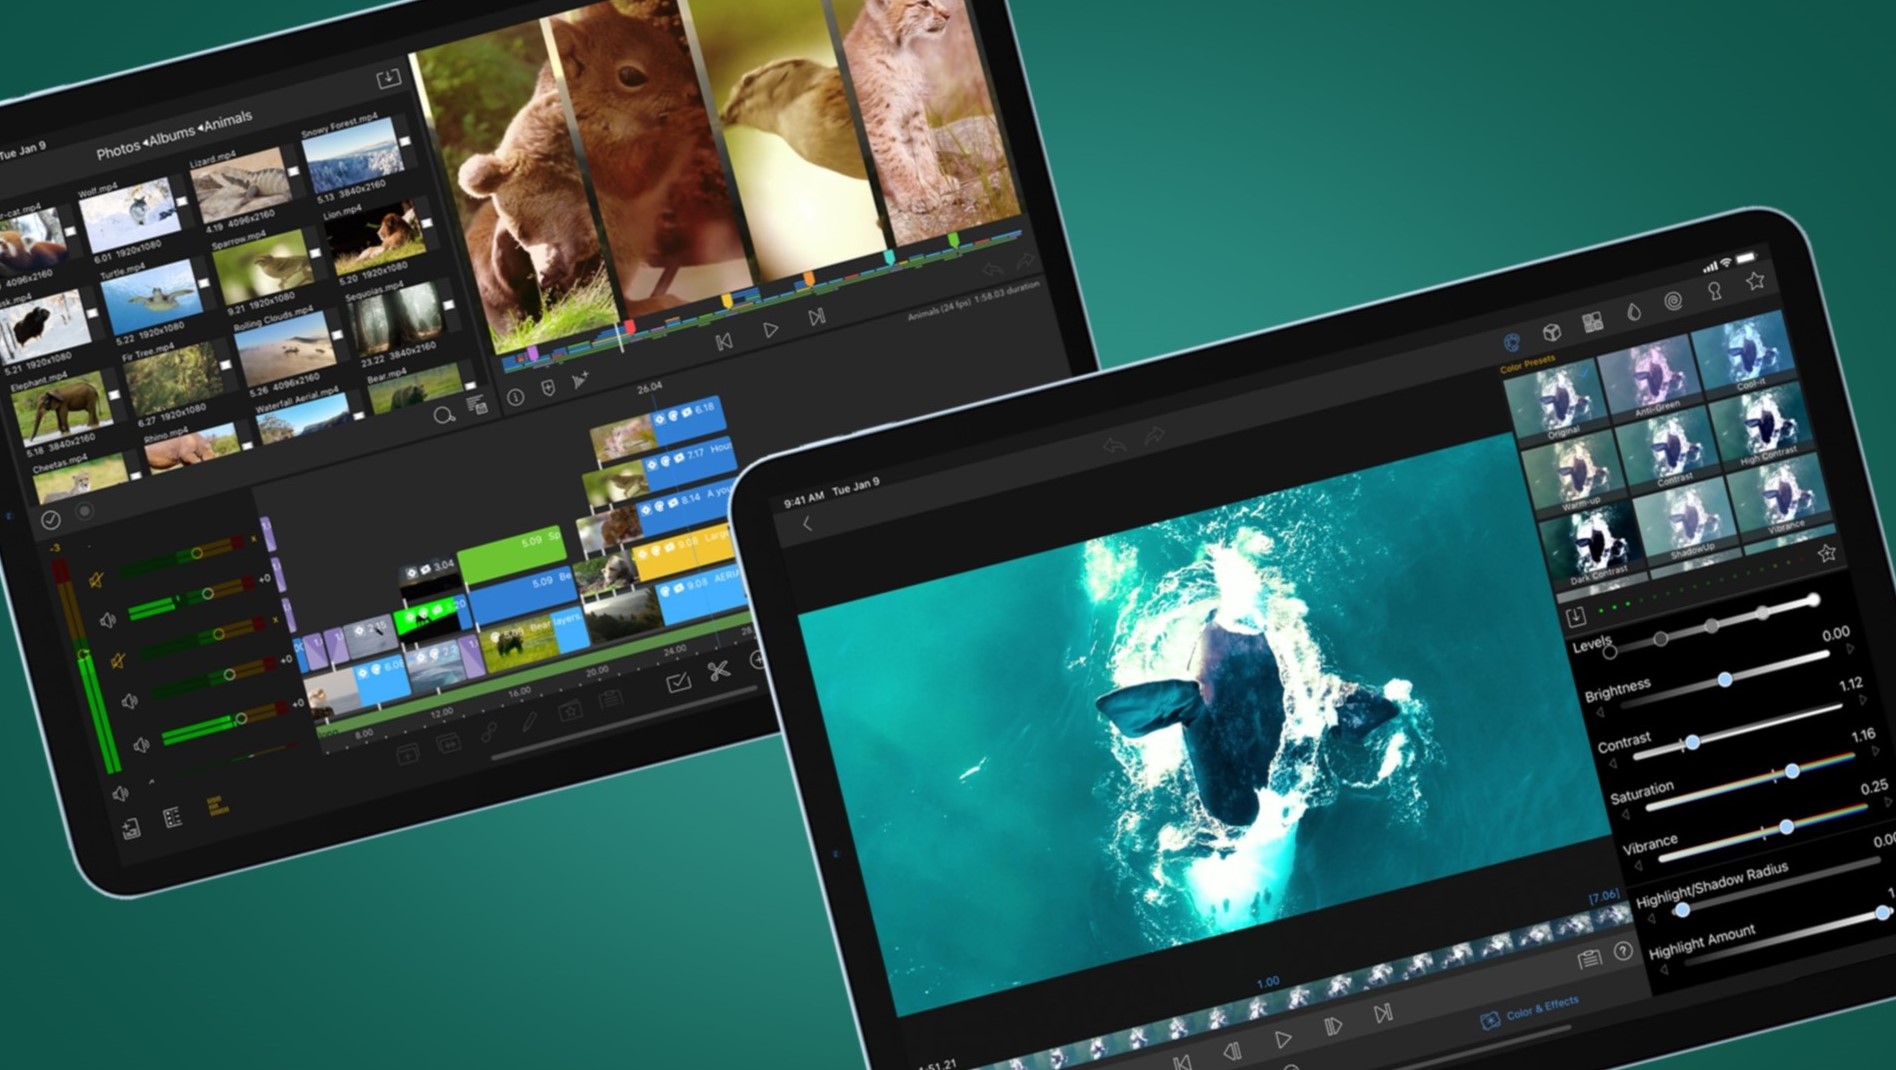 Top Android Tablets for Video Editing